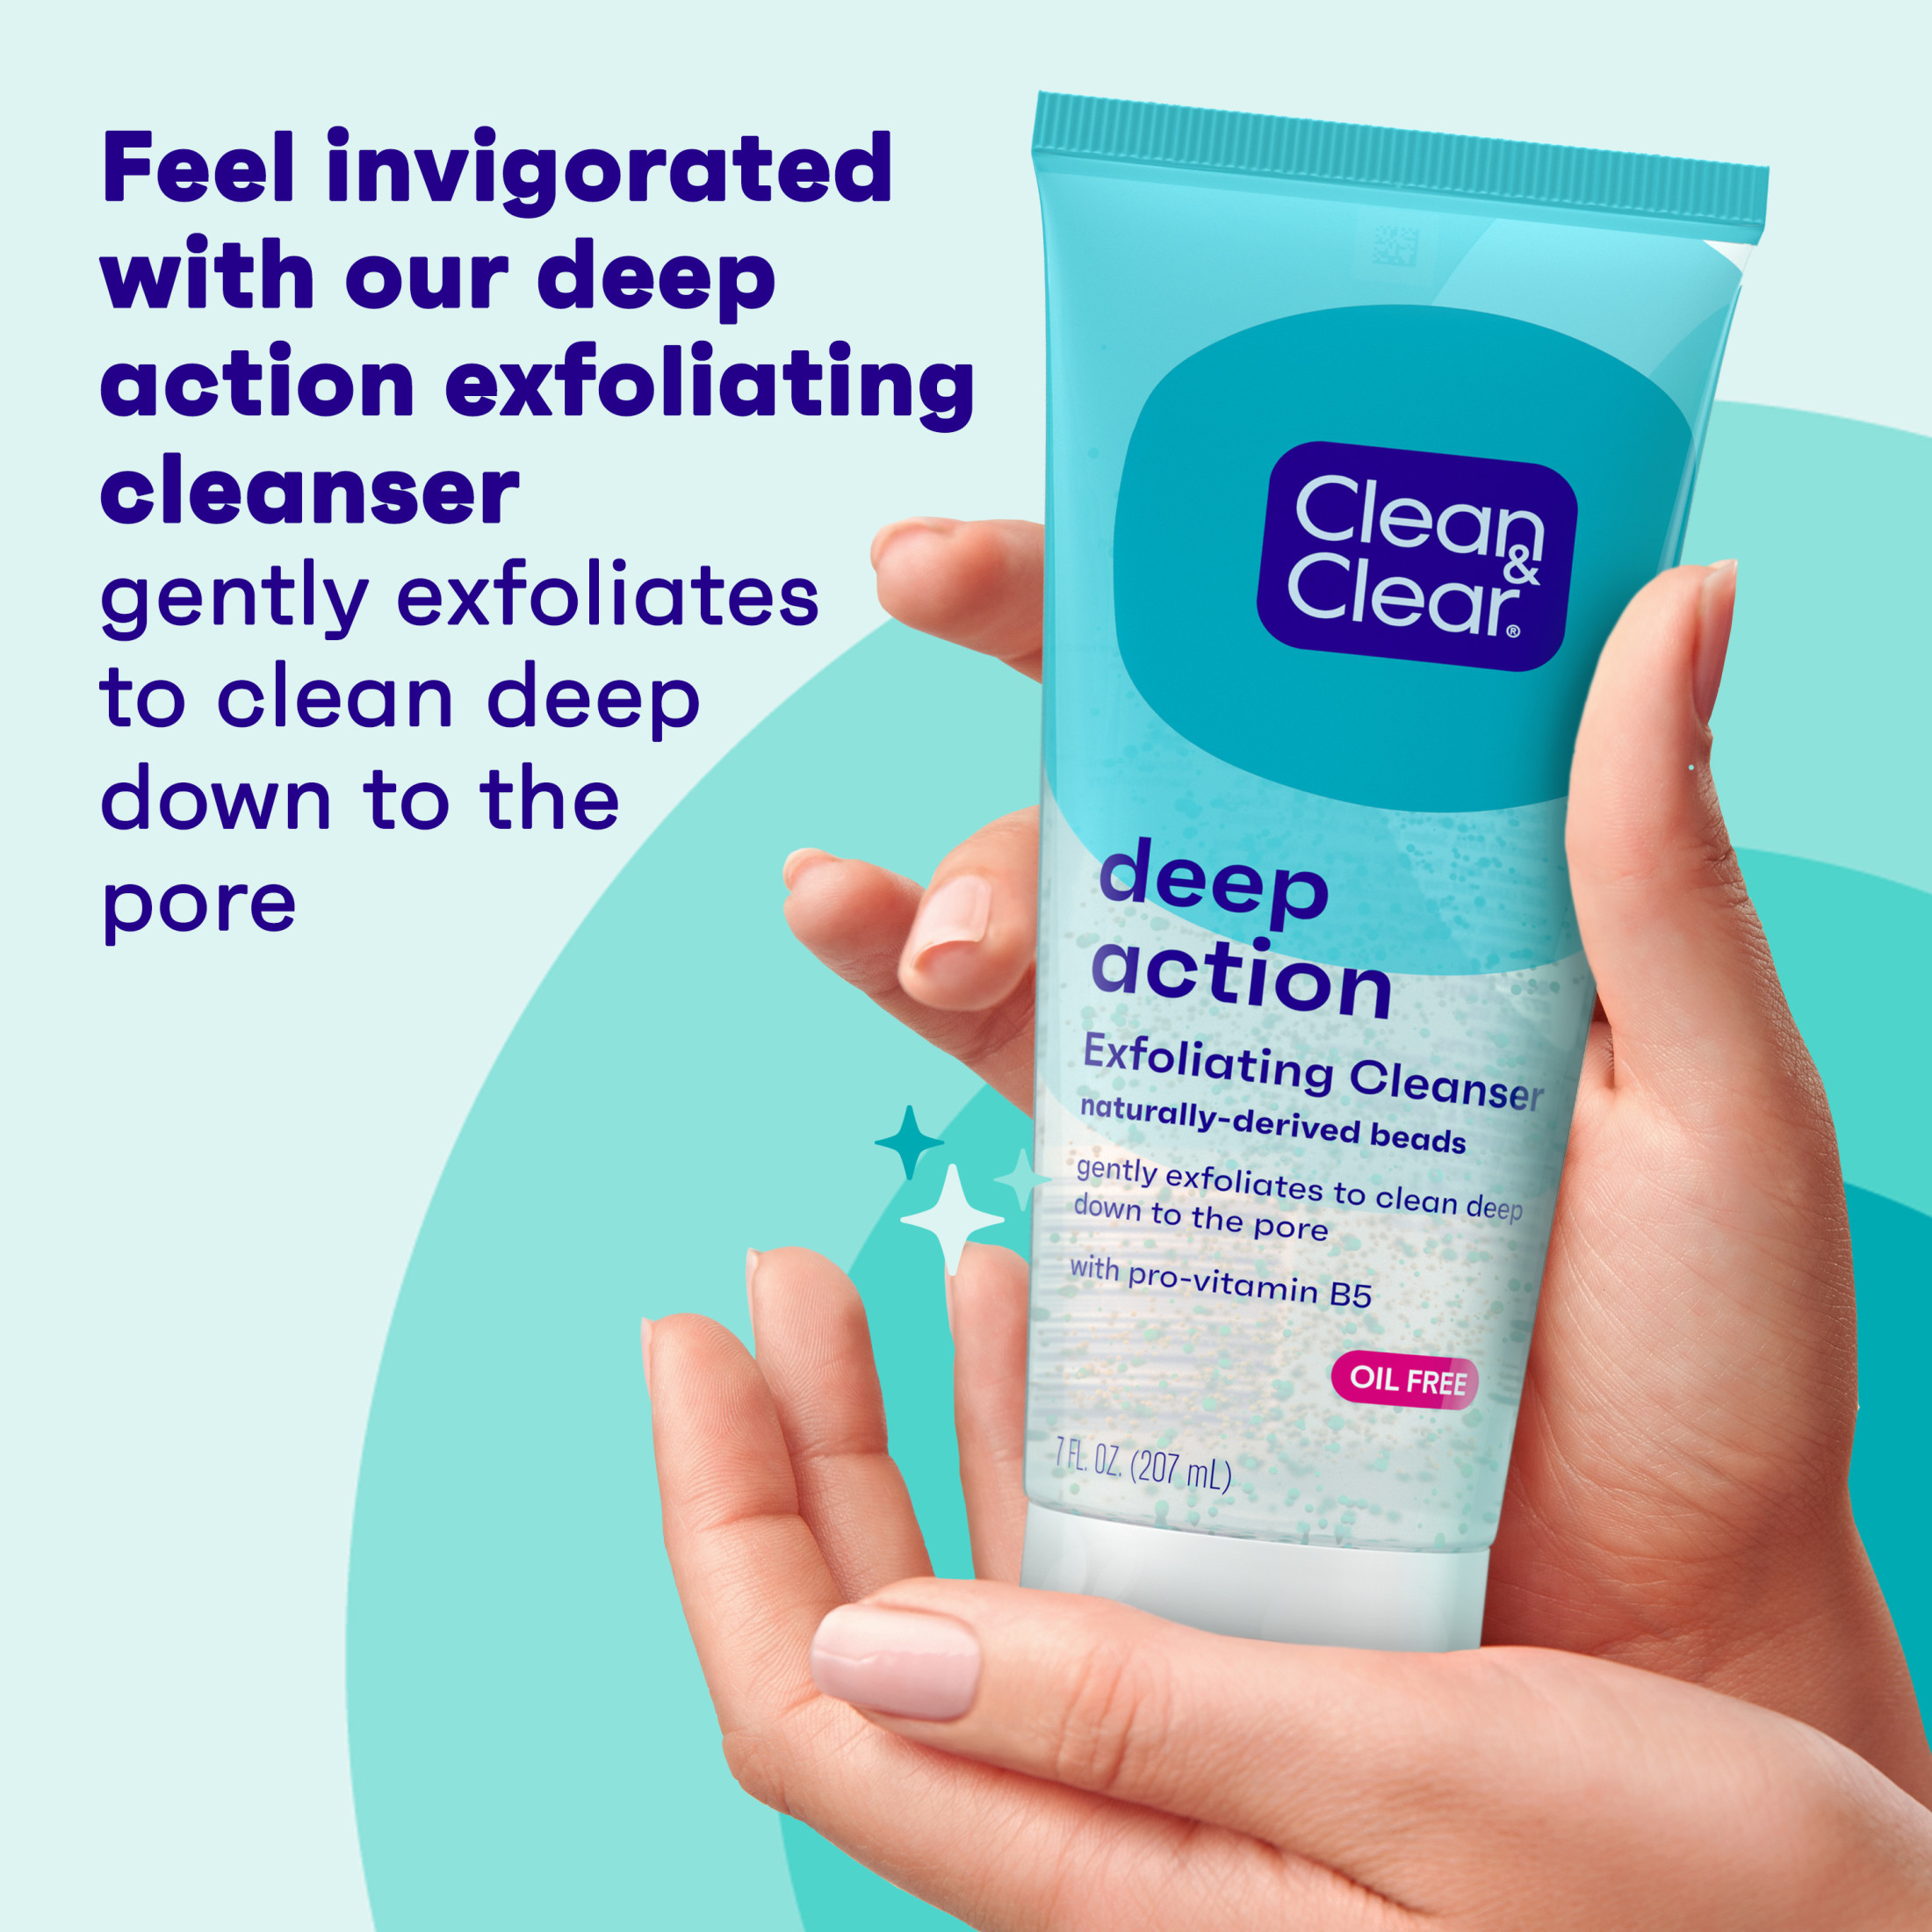 Clean Clear Oil-Free Deep Action Exfoliating Acne Face Scrub, Facial Cleanser and Wash, 7 oz - image 3 of 8